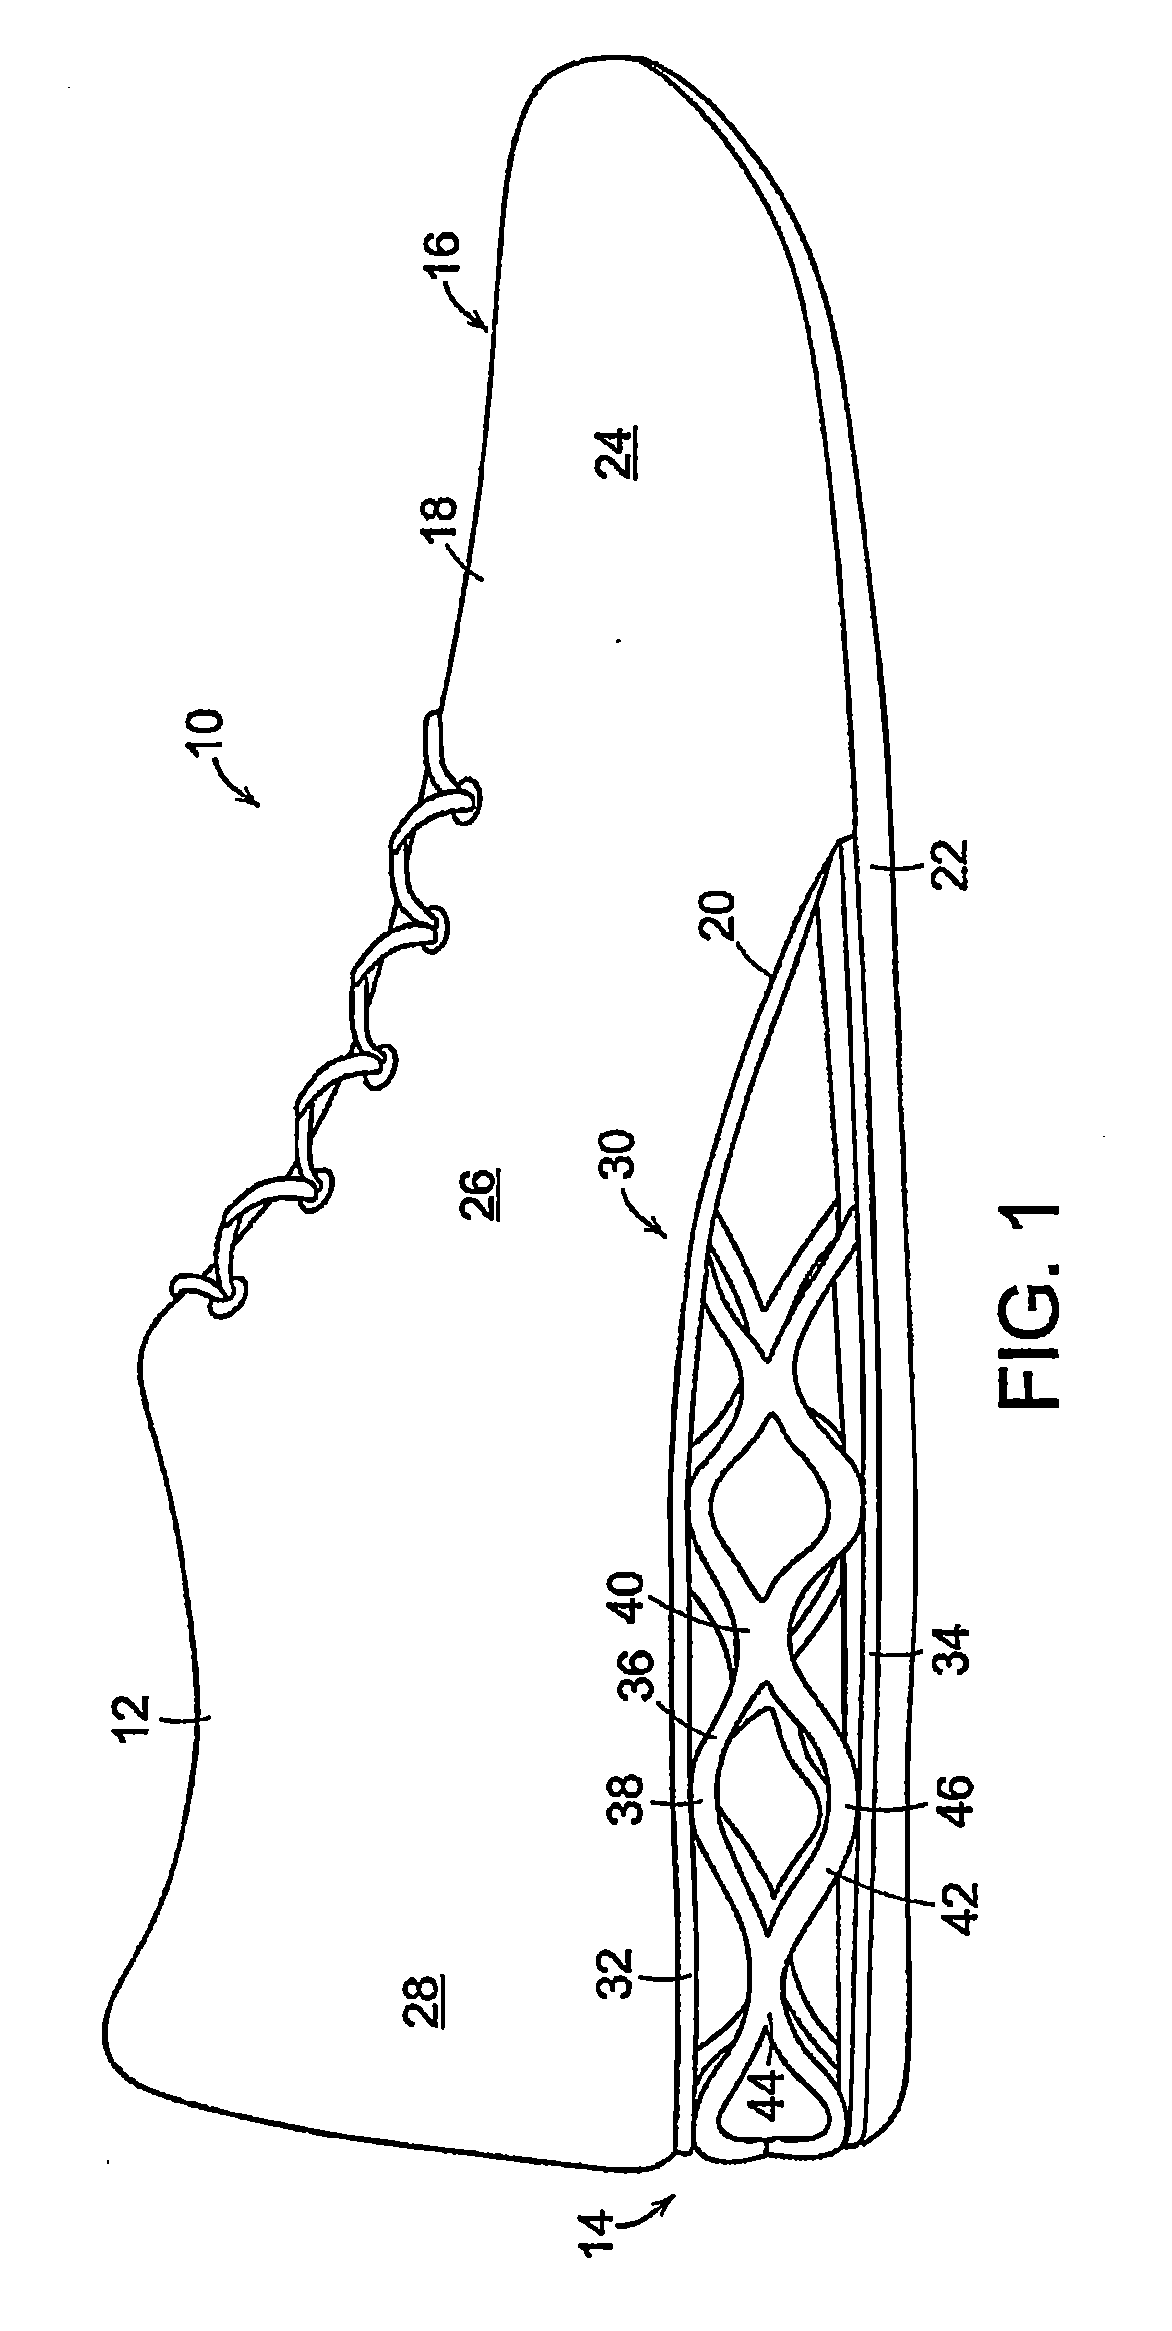 Article of Footwear with Multi-Layered Support Assembly